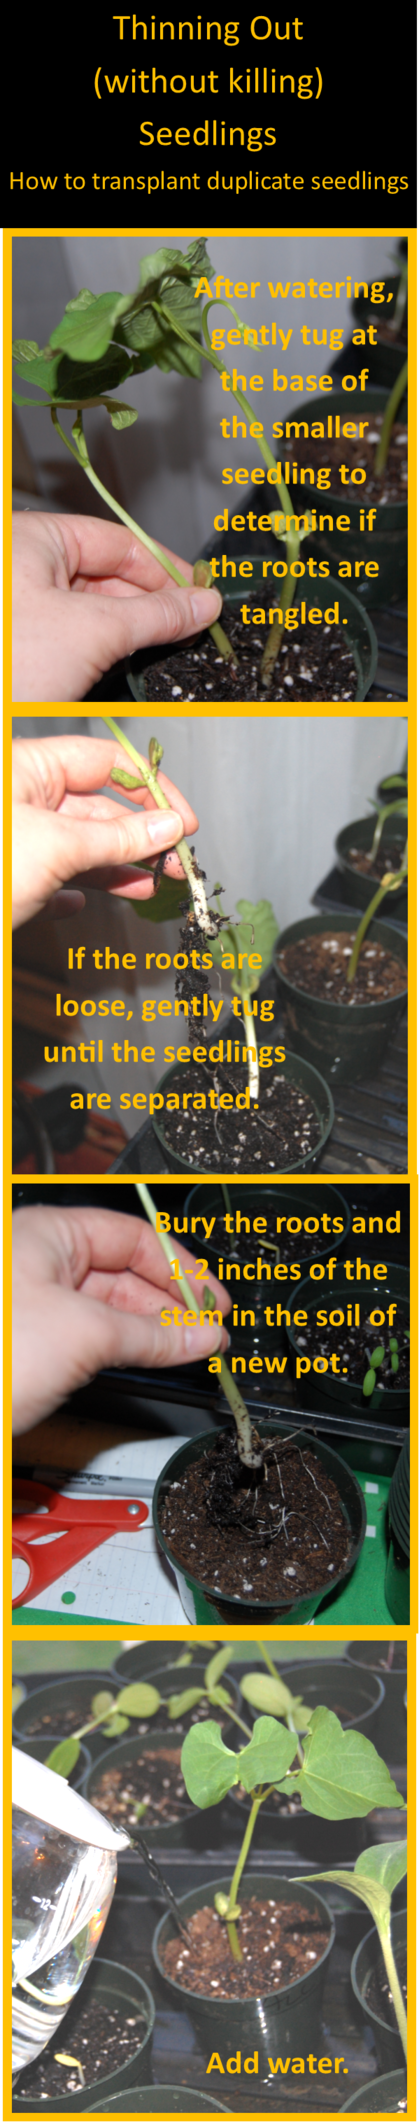 Step 1: After watering, gently tug at the base of the smaller seeding to determine if the roots are tangled.  Step 2: If the roots are loose, gently tug until the seedlings are separated  Step 3: Bury the roots and 1-2 inches of the stem in the soil of a new pot.  step 4: Add water